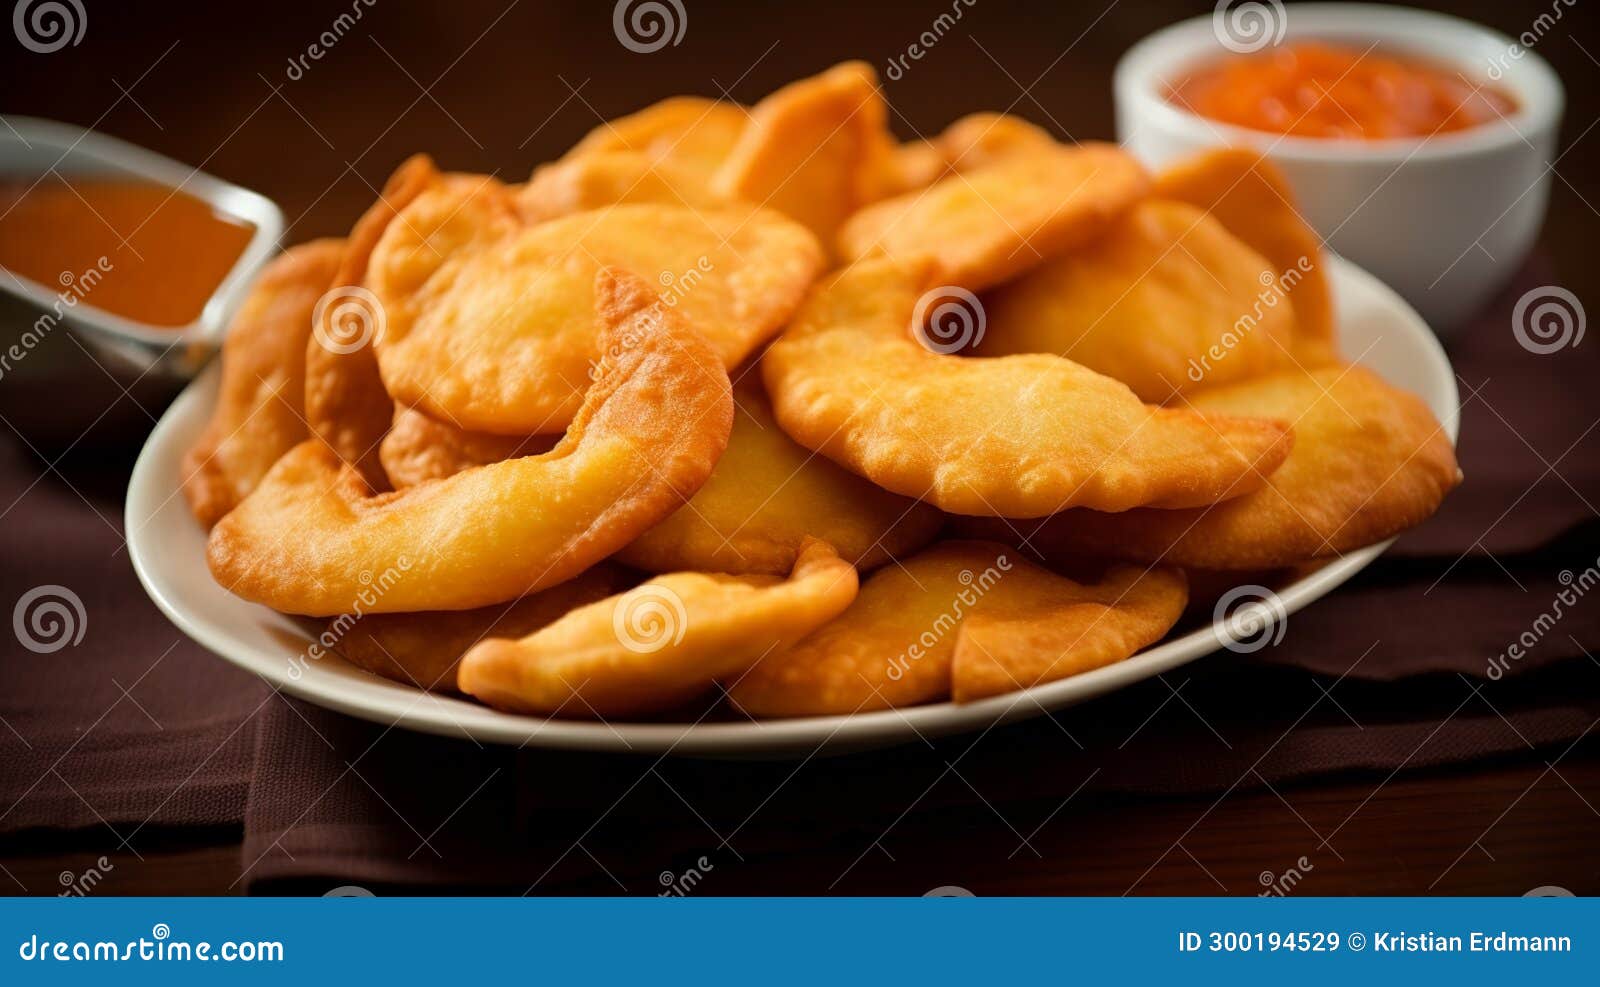 sopaipillas: pumpkin-based fried pastries with pebre sauce